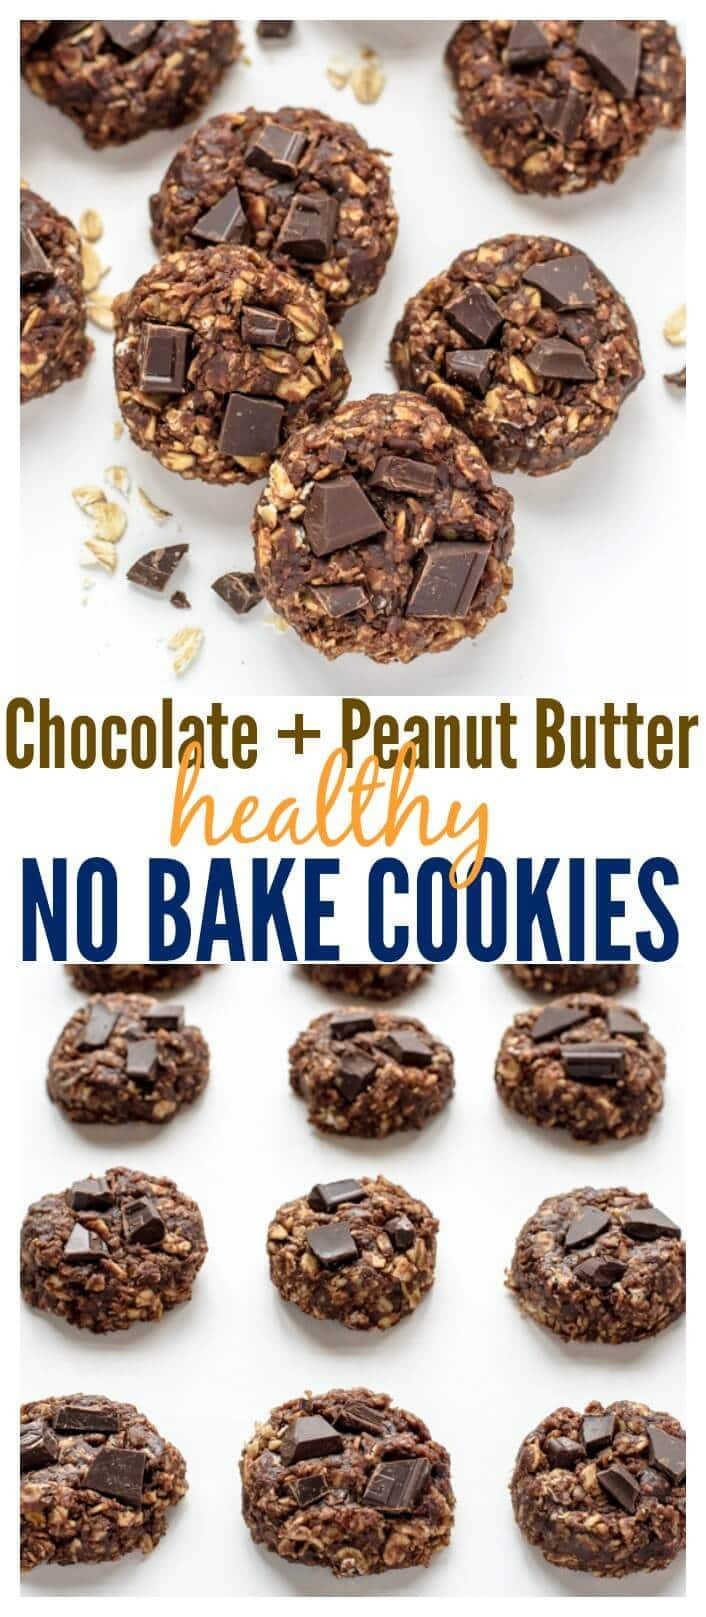 Healthy No Bake Cookies
 Healthy No Bake Cookies with Chocolate and Peanut Butter